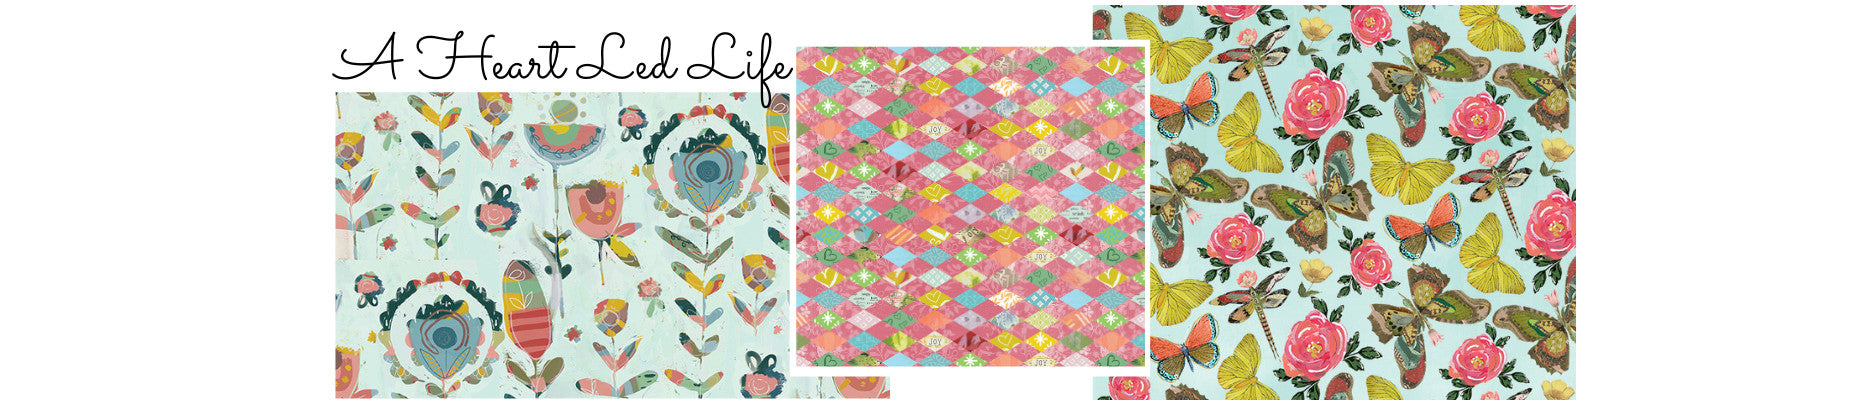 Fabric swatches of butterflies, flowers and harlequin prints in pretty light turquoise and corals.  A Heart Led Life Kelly Rae Roberts.